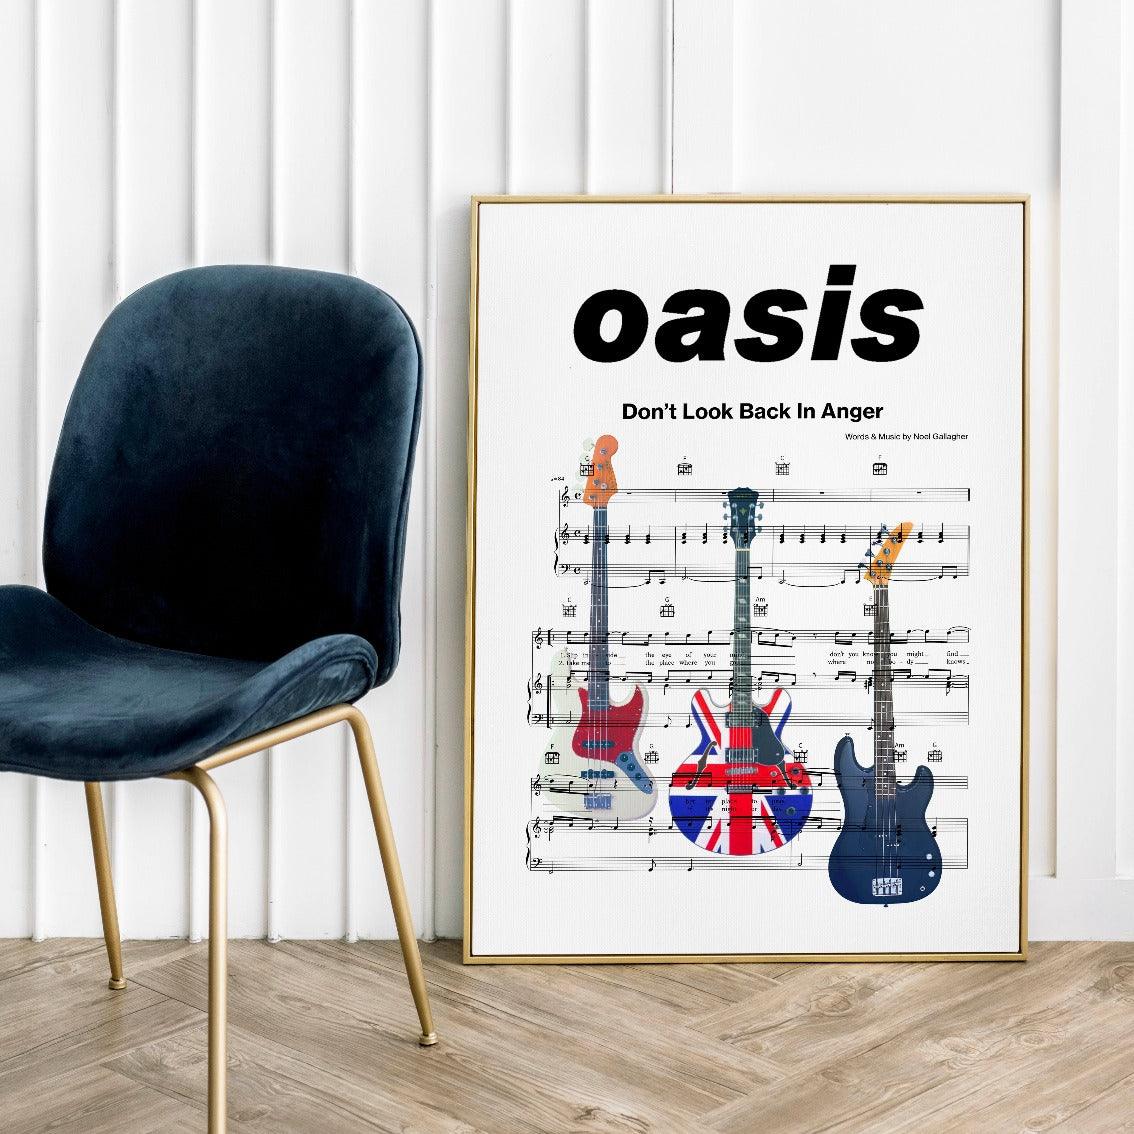 Oasis • Don’t Look Back In Anger Song Lyric Print | Song Music Sheet Notes Print  Everyone has a favorite song and now Oasis • Don’t Look Back In Anger you can show the score as printed staff. The personal favorite song sheet print shows the song chosen as the score. 